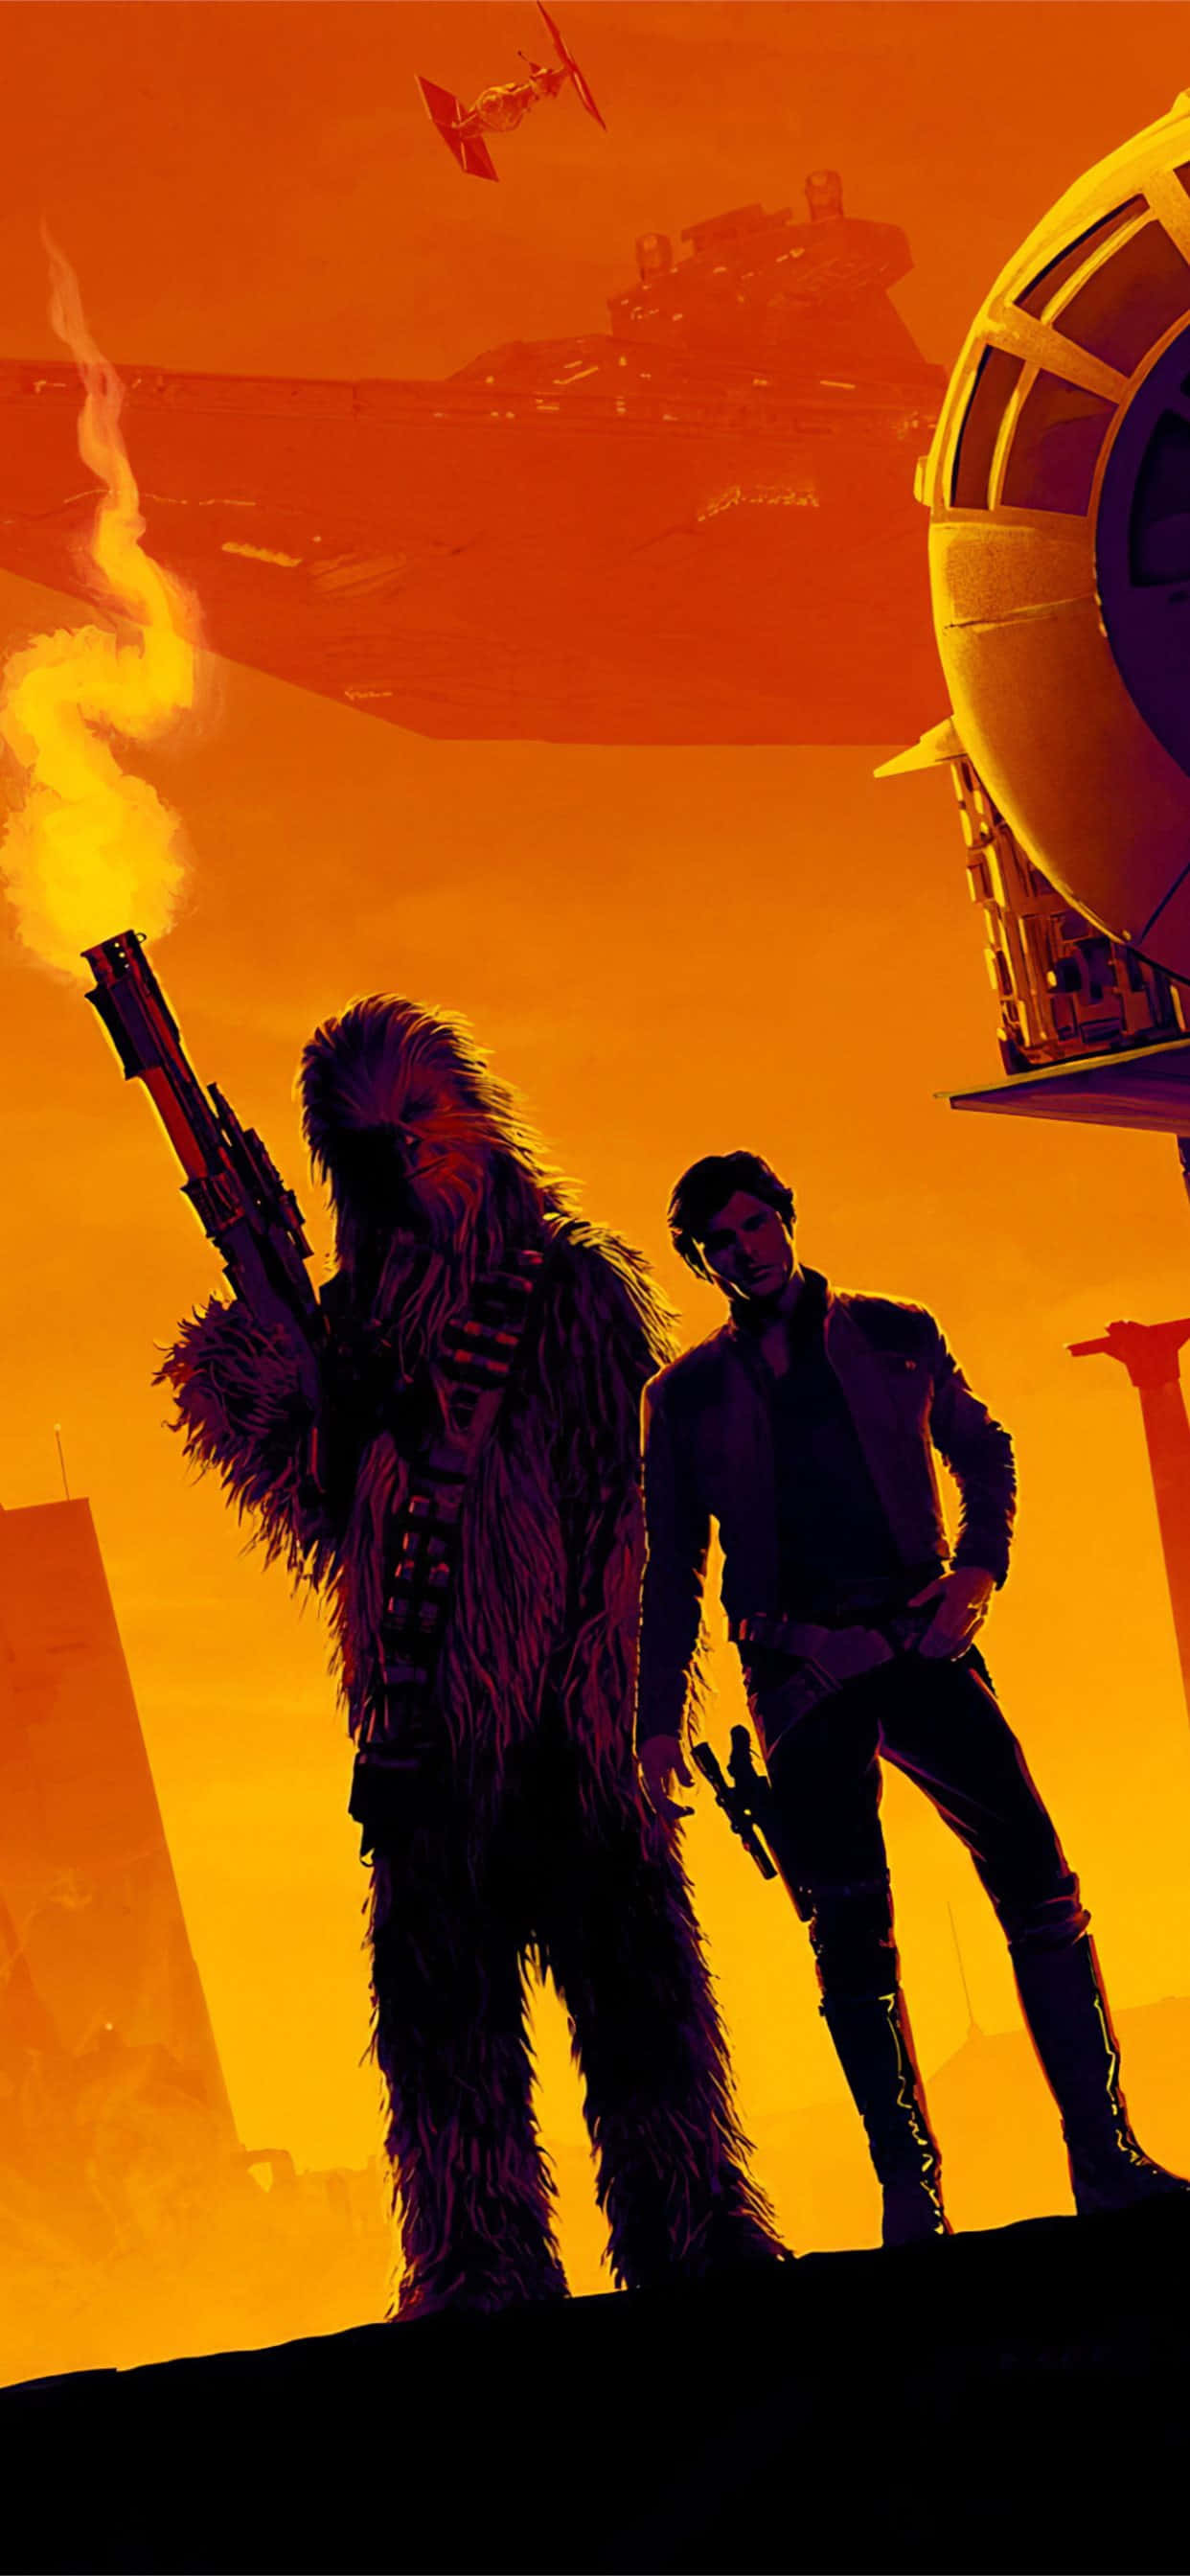 Han Solo and Chewbacca in Solo: A Star Wars Story Wallpaper